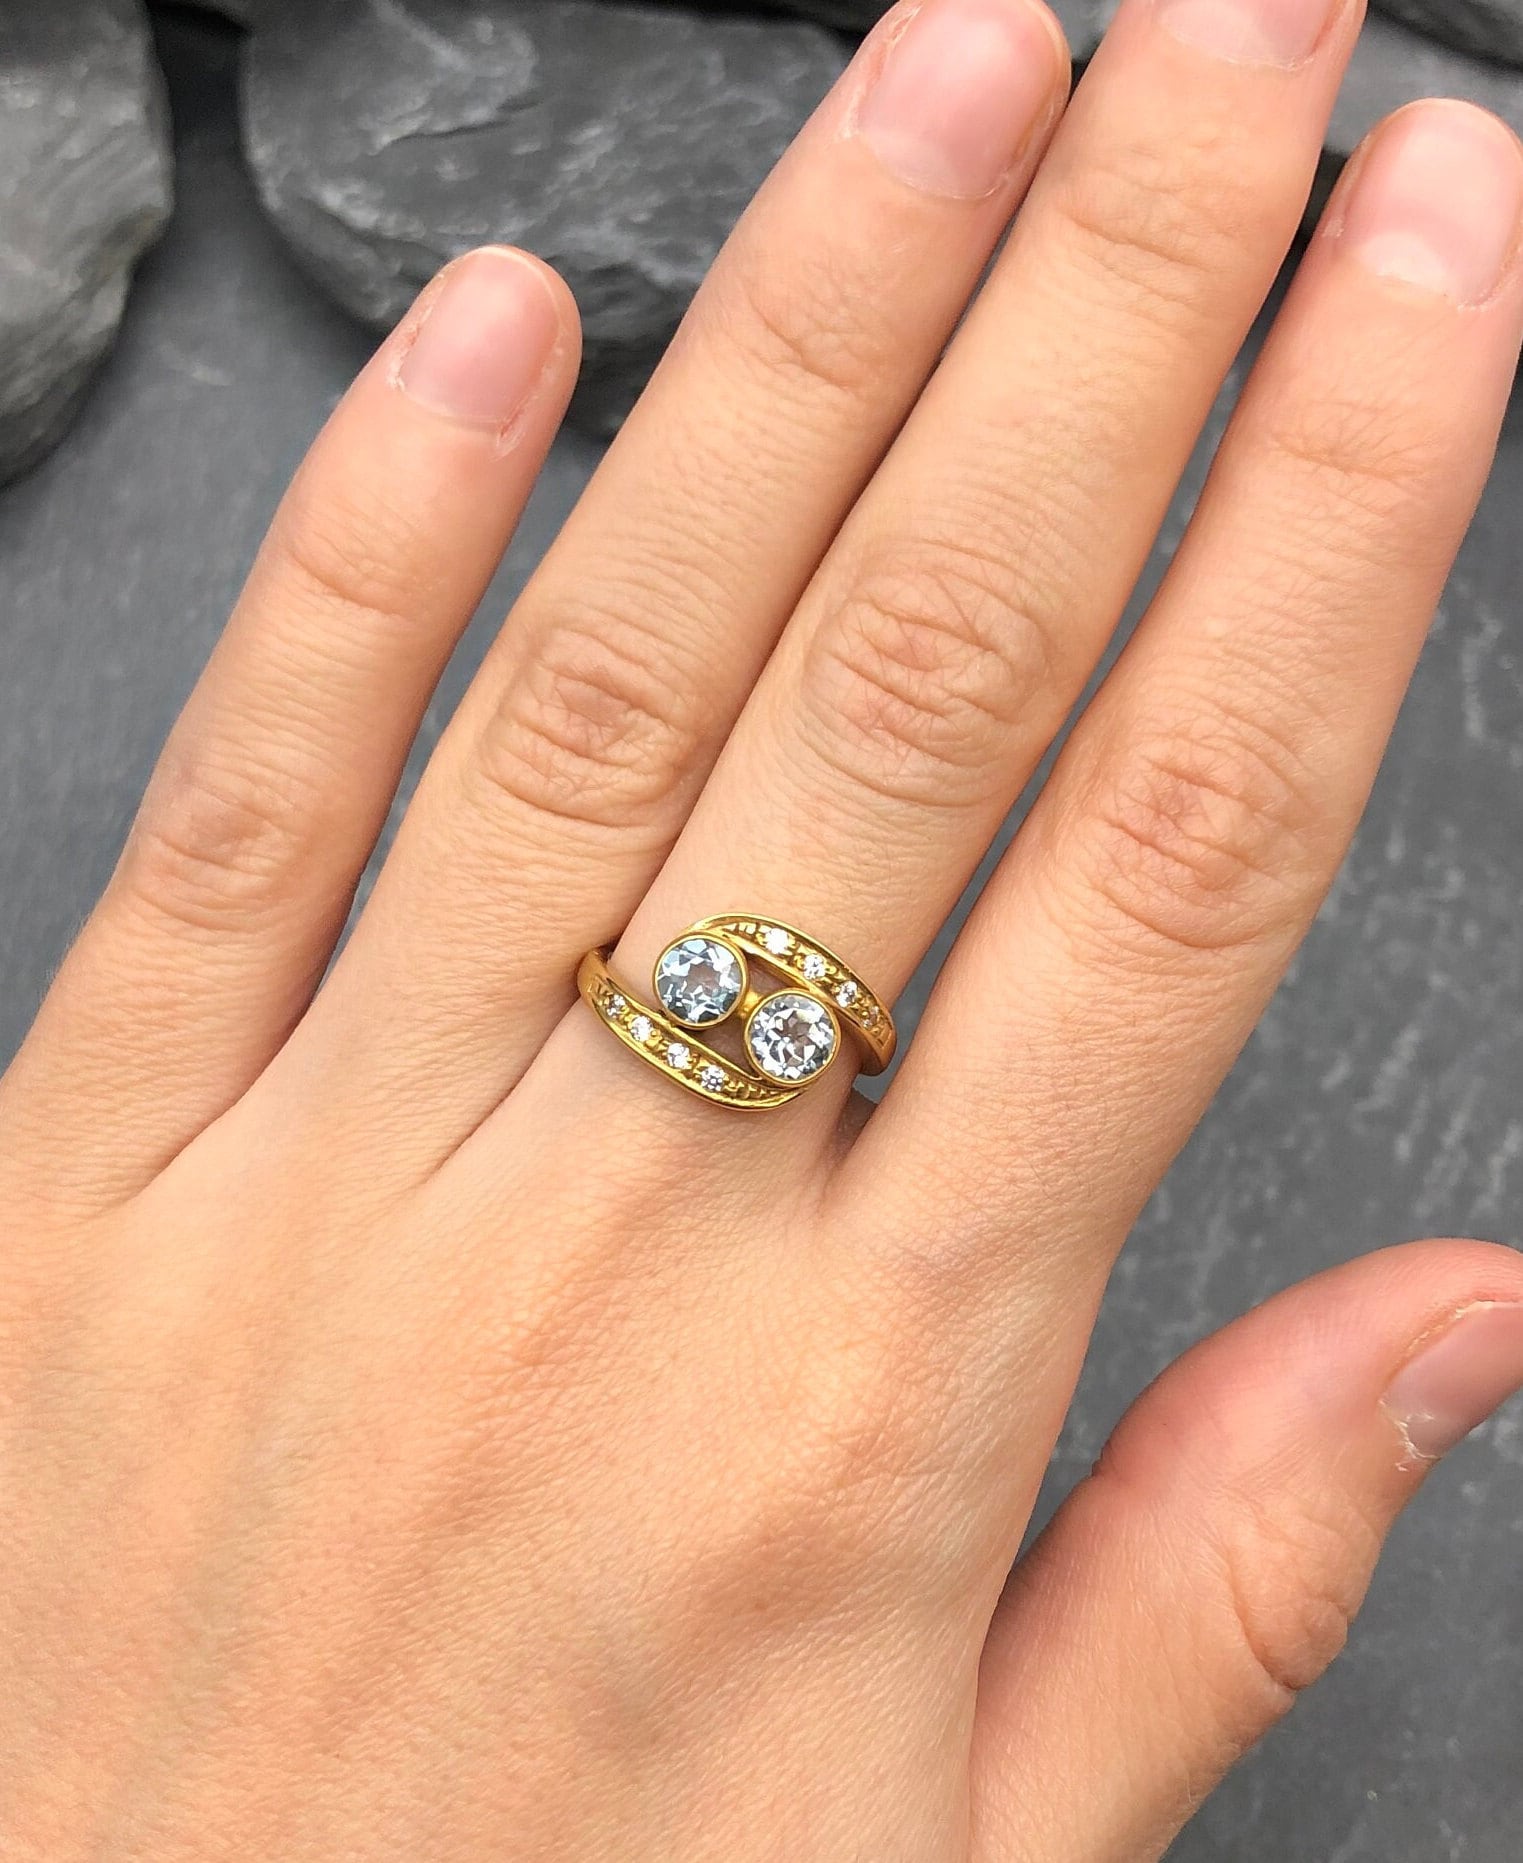 Gold Blue Topaz Ring, Natural Sky Blue Topaz, Bypass Ring, Christmas Gift, Antique Ring, Two Stone Ring, December Birthstone, Gold Vermeil